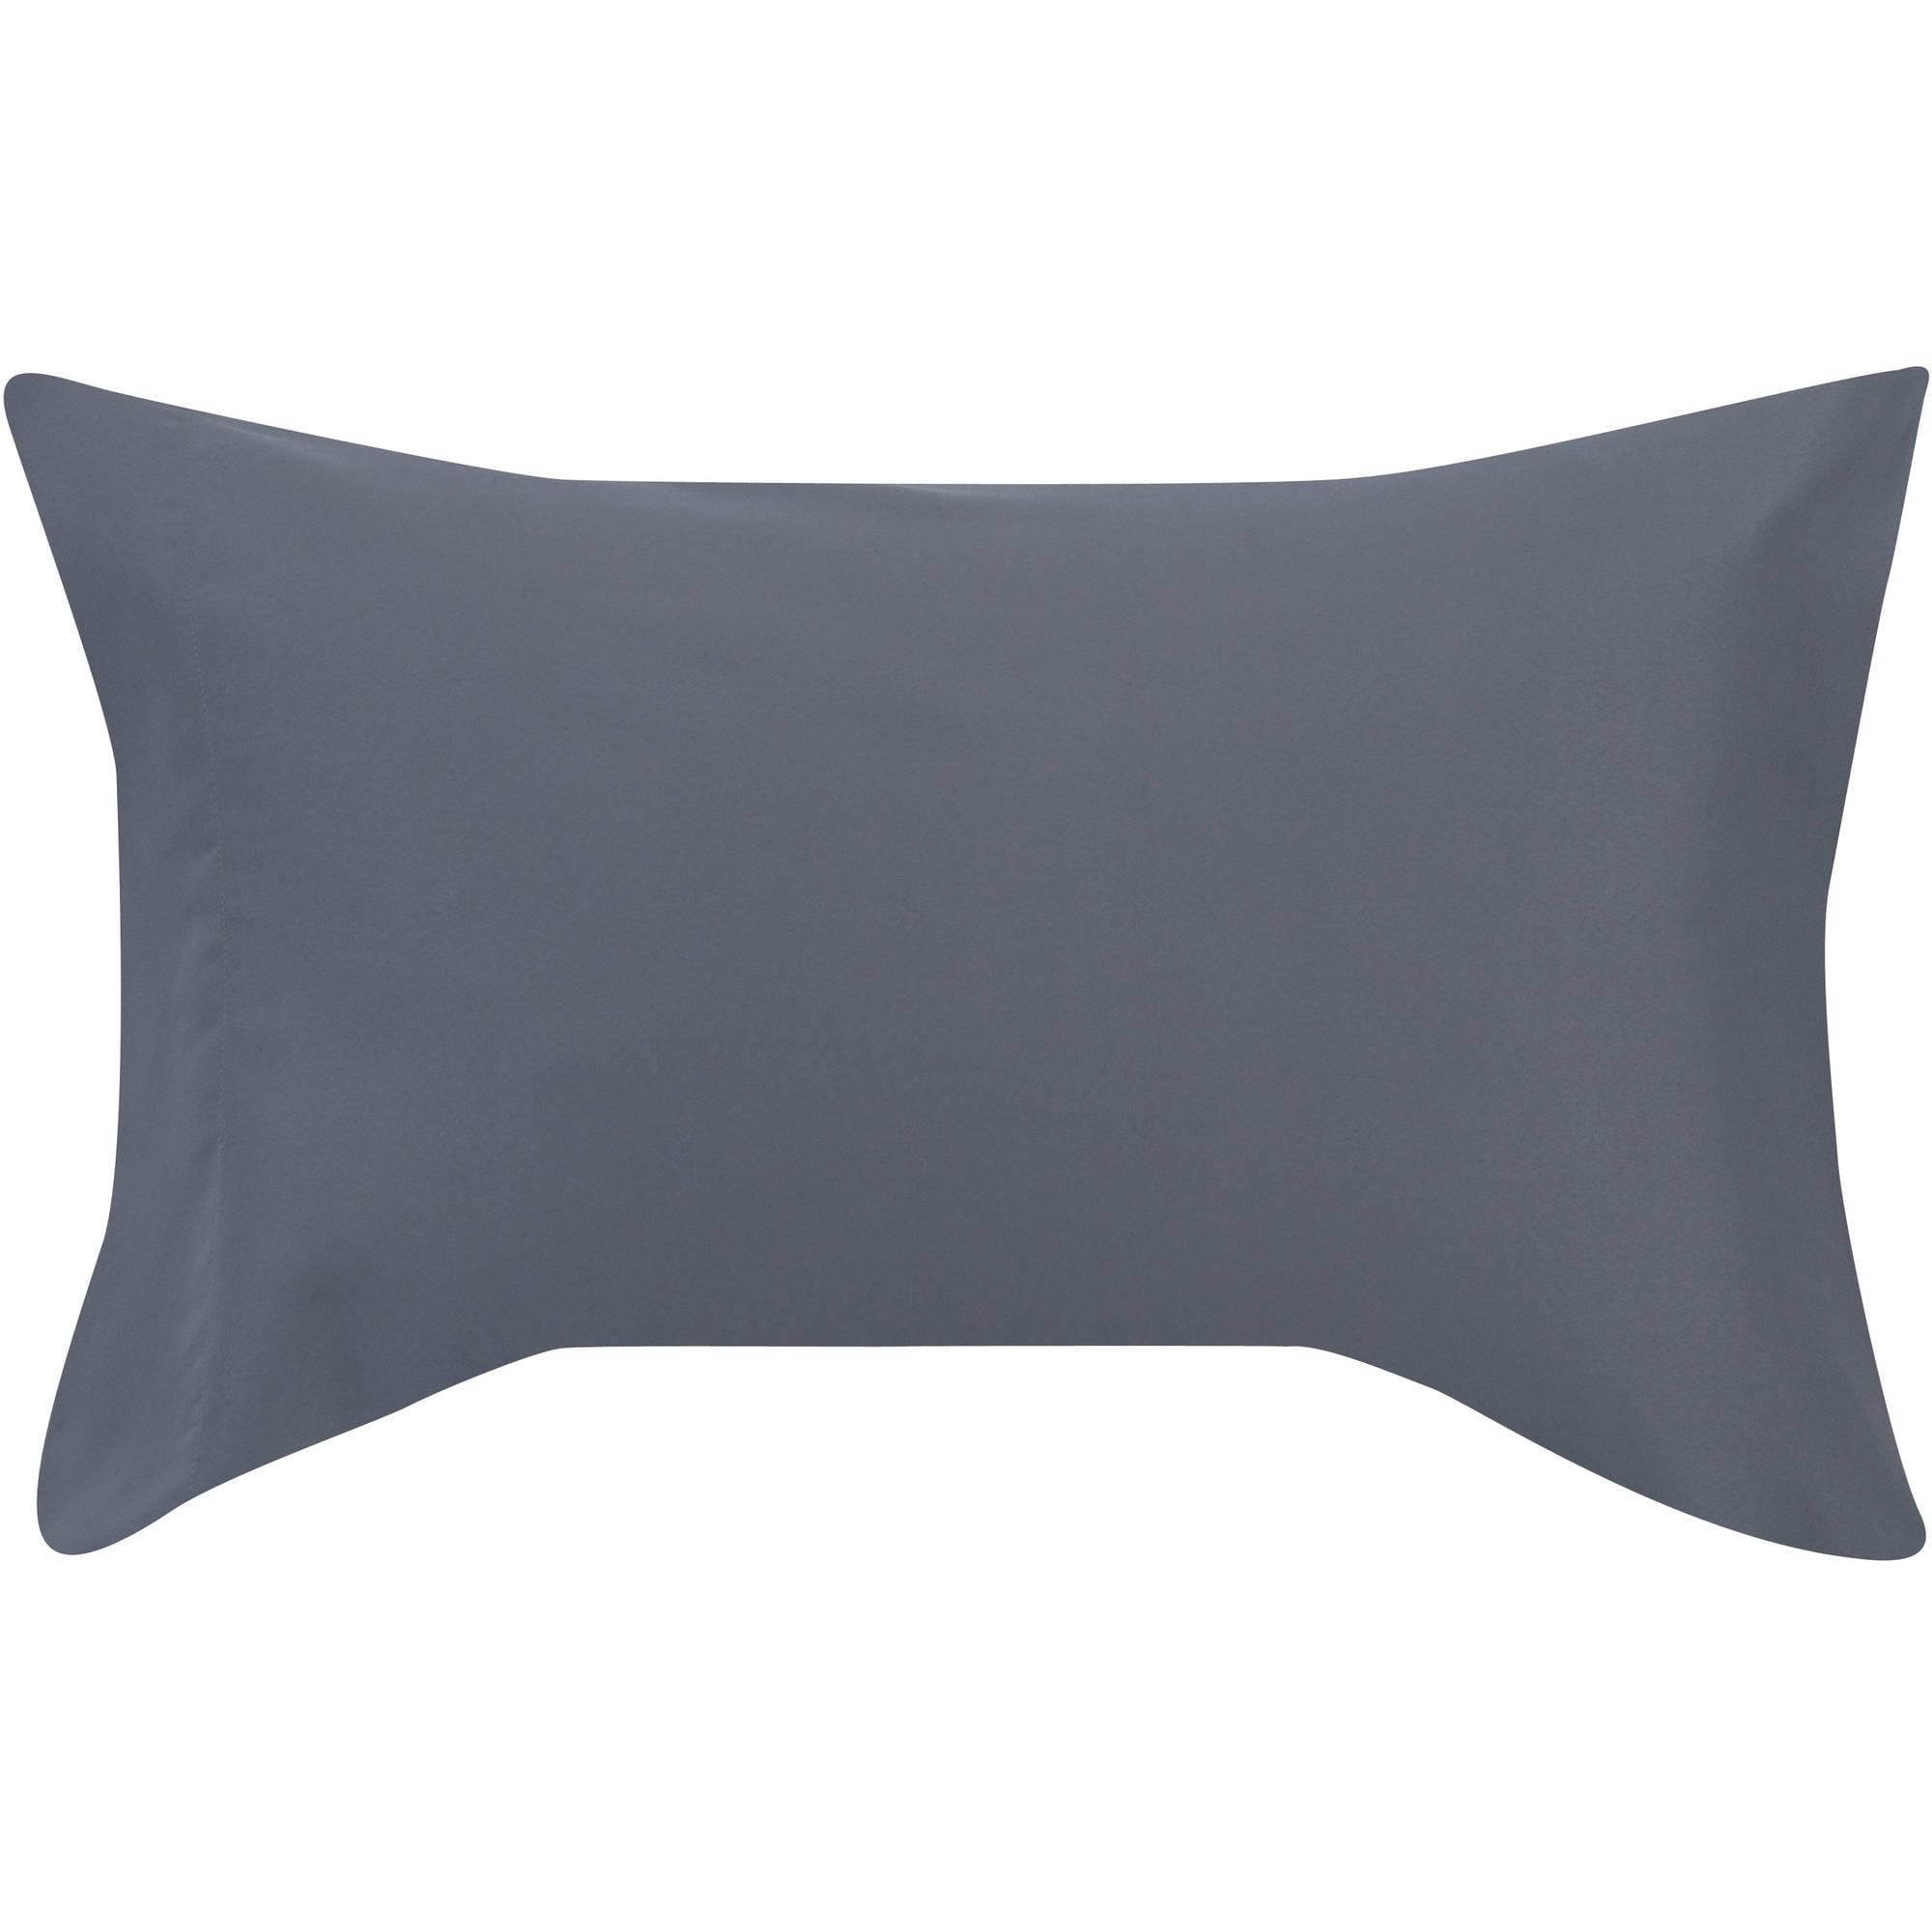 NEW 1 Pillowcases Standard Size NEW Gray by Home Collection 